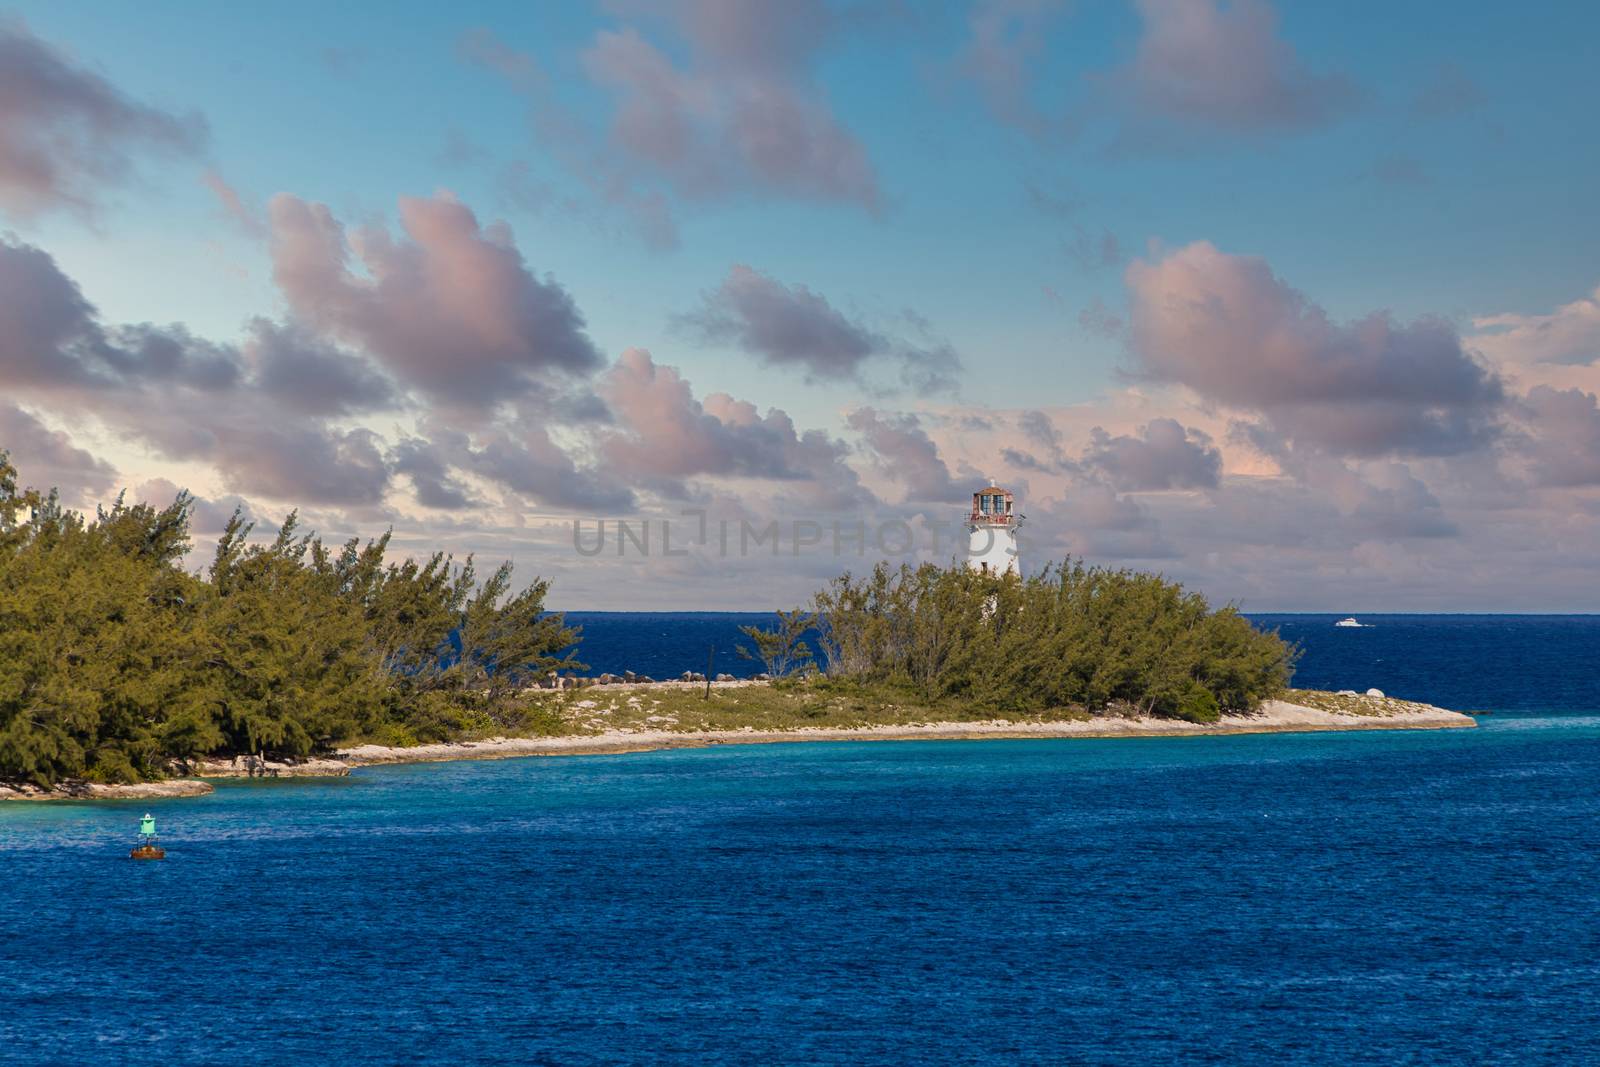 The Lighthouse in Nassau Bahamas on Point of Land